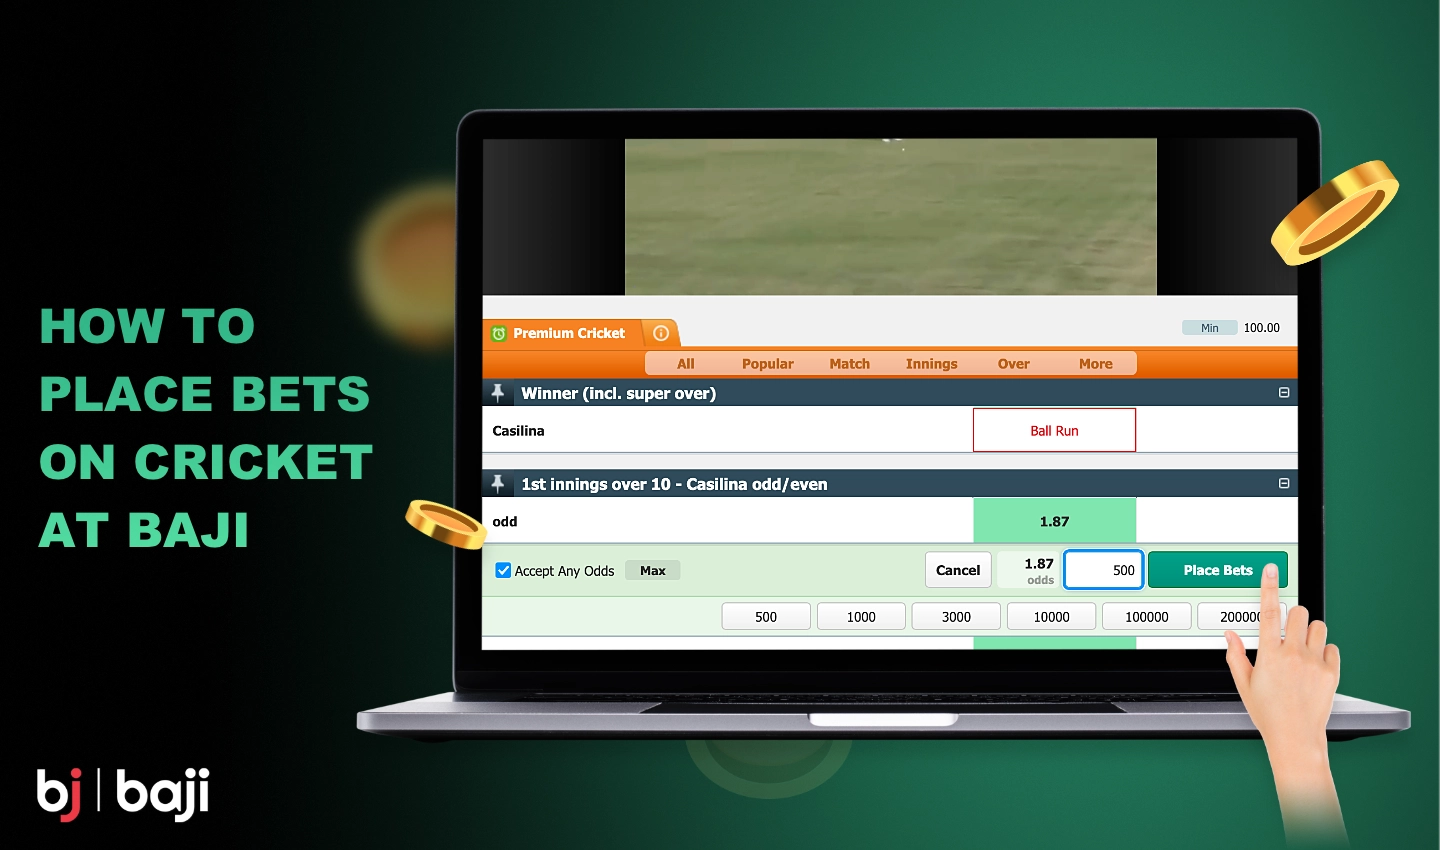 In order to start betting on cricket at Baji a user needs to follow a few simple steps